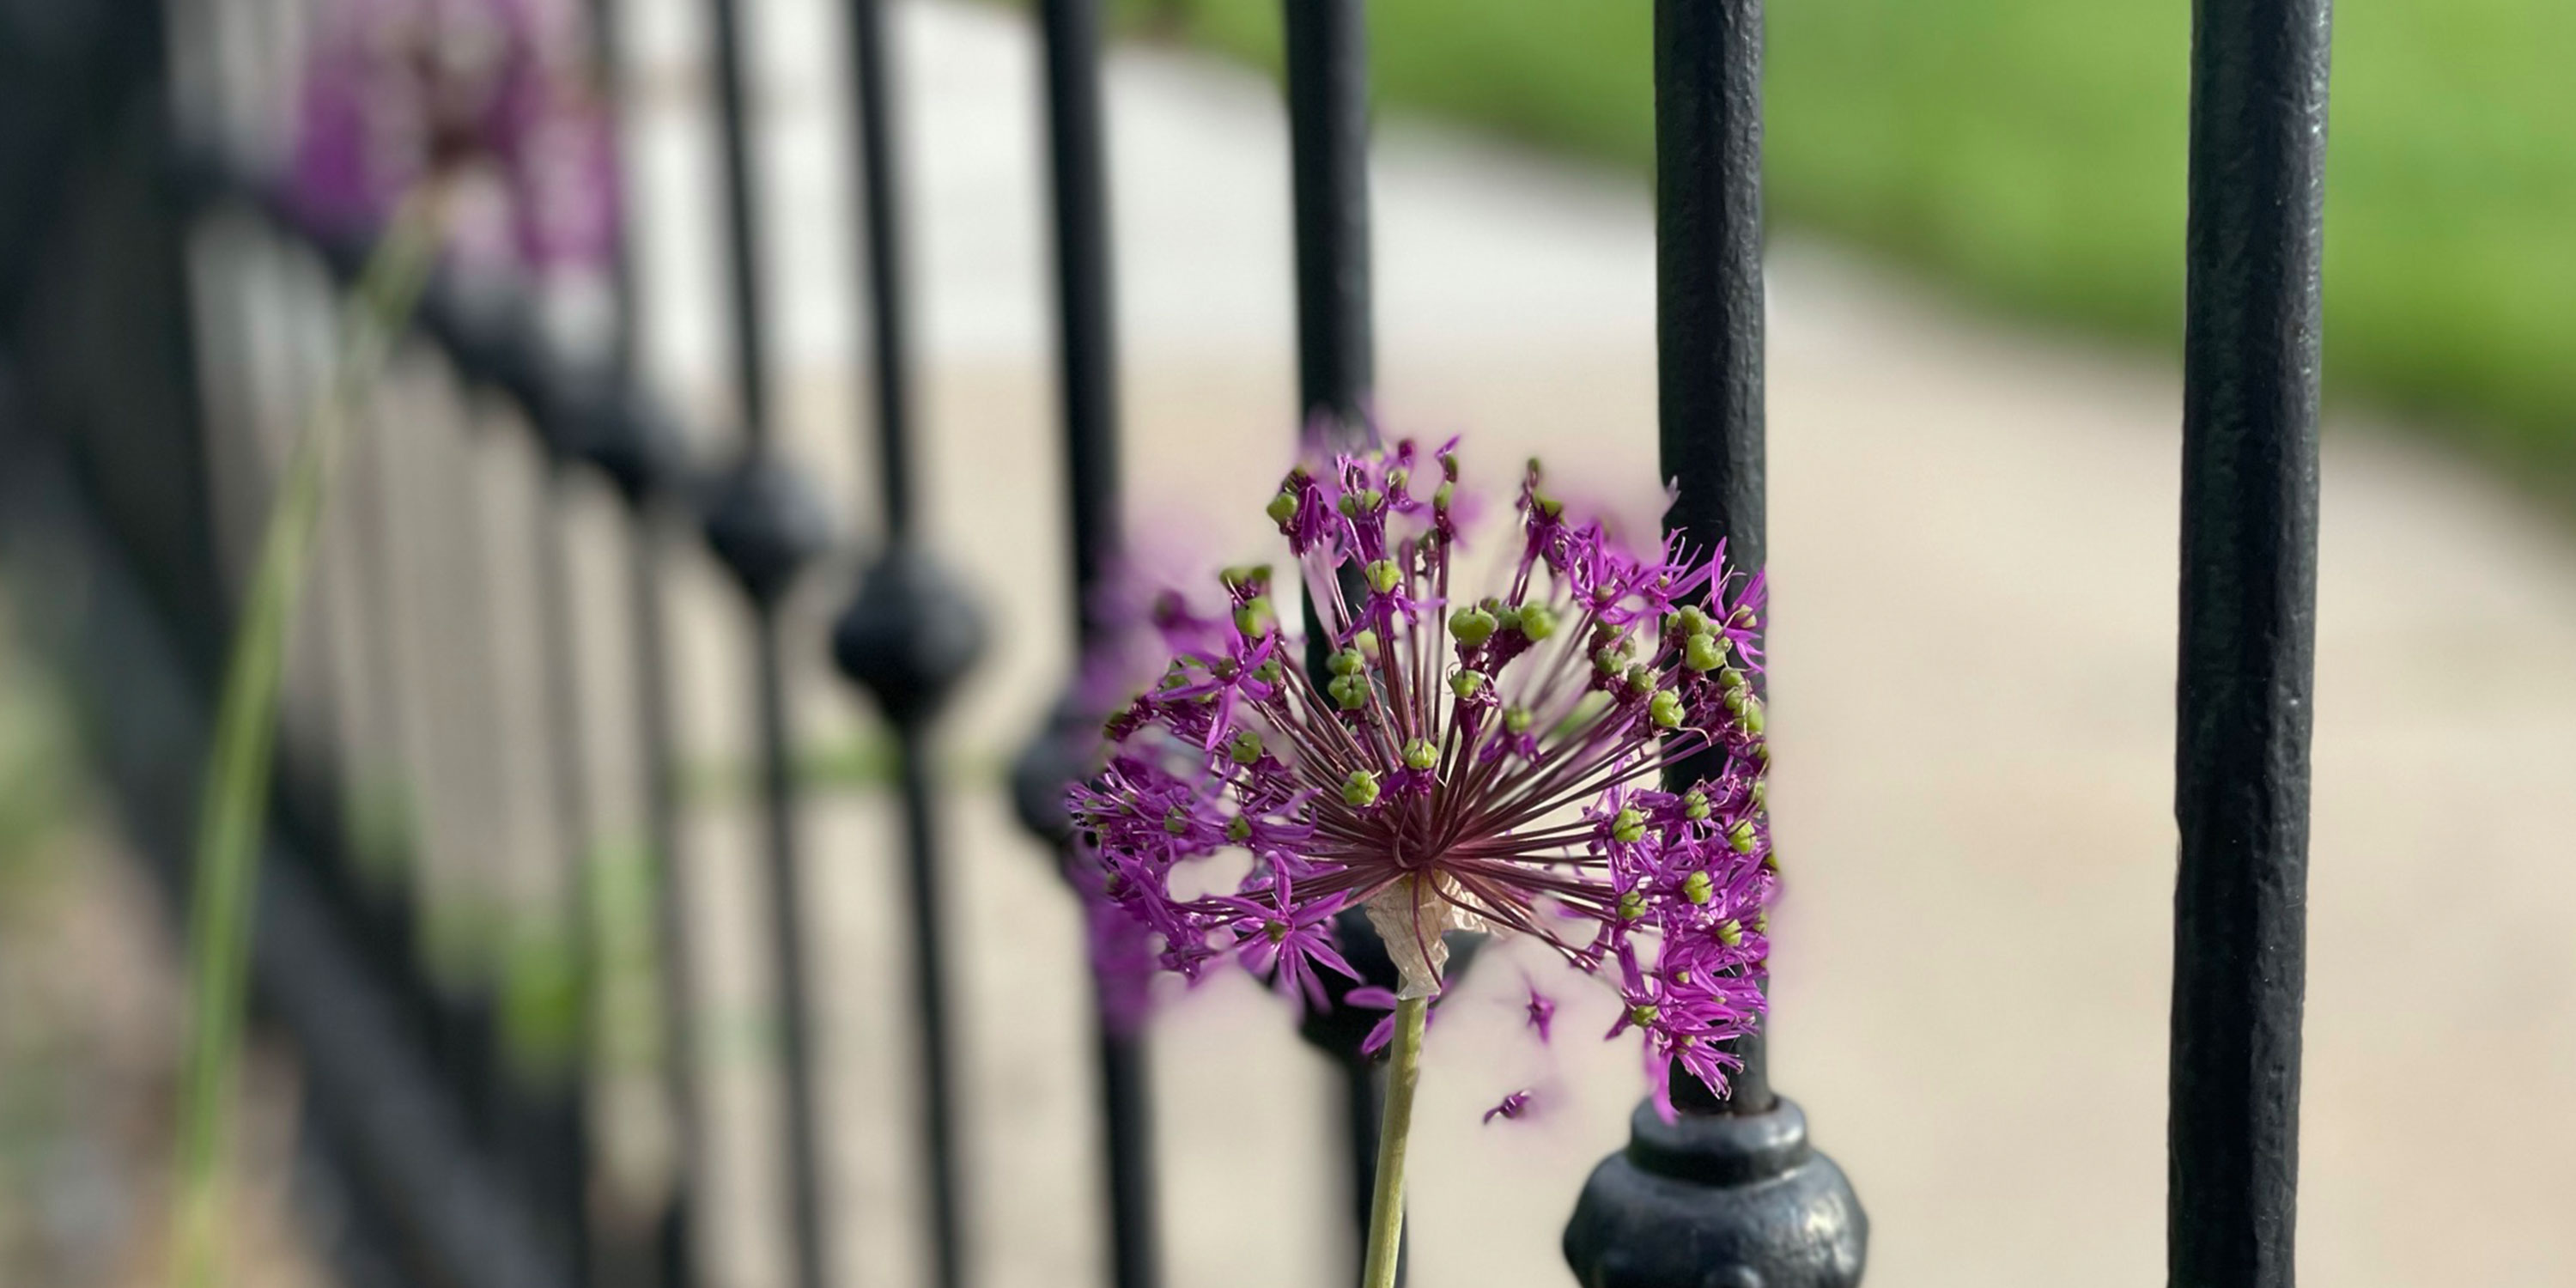 Allium flower in front of a black fence